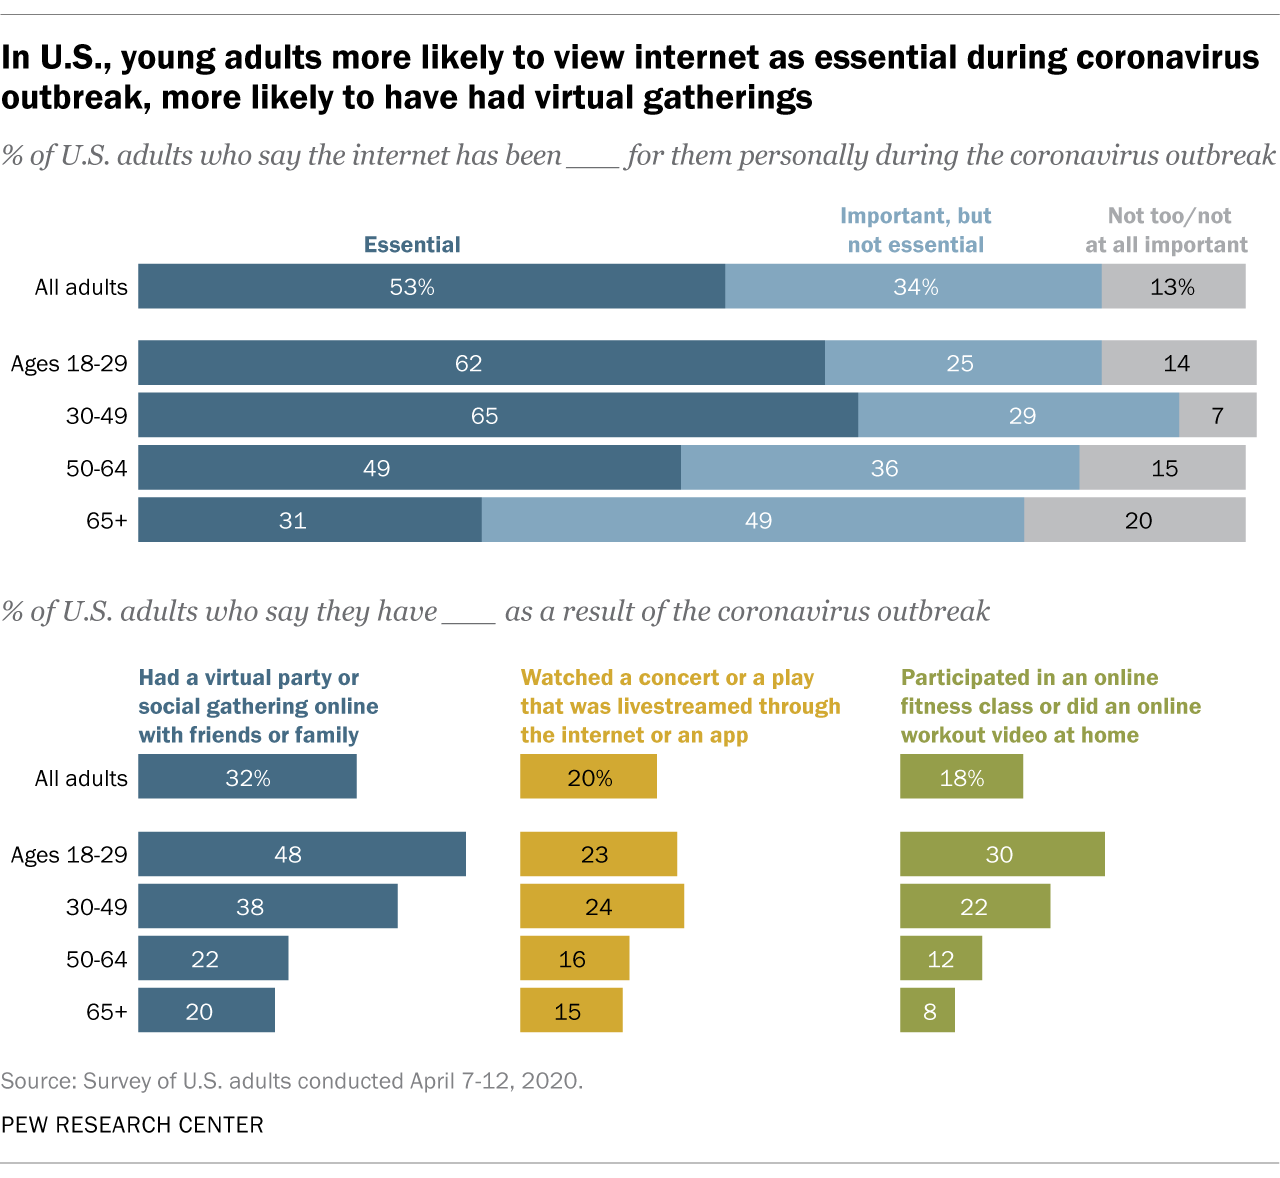 In U.S., young adults more likely to view internet as essential during coronavirus outbreak, more likely to have had virtual gatherings